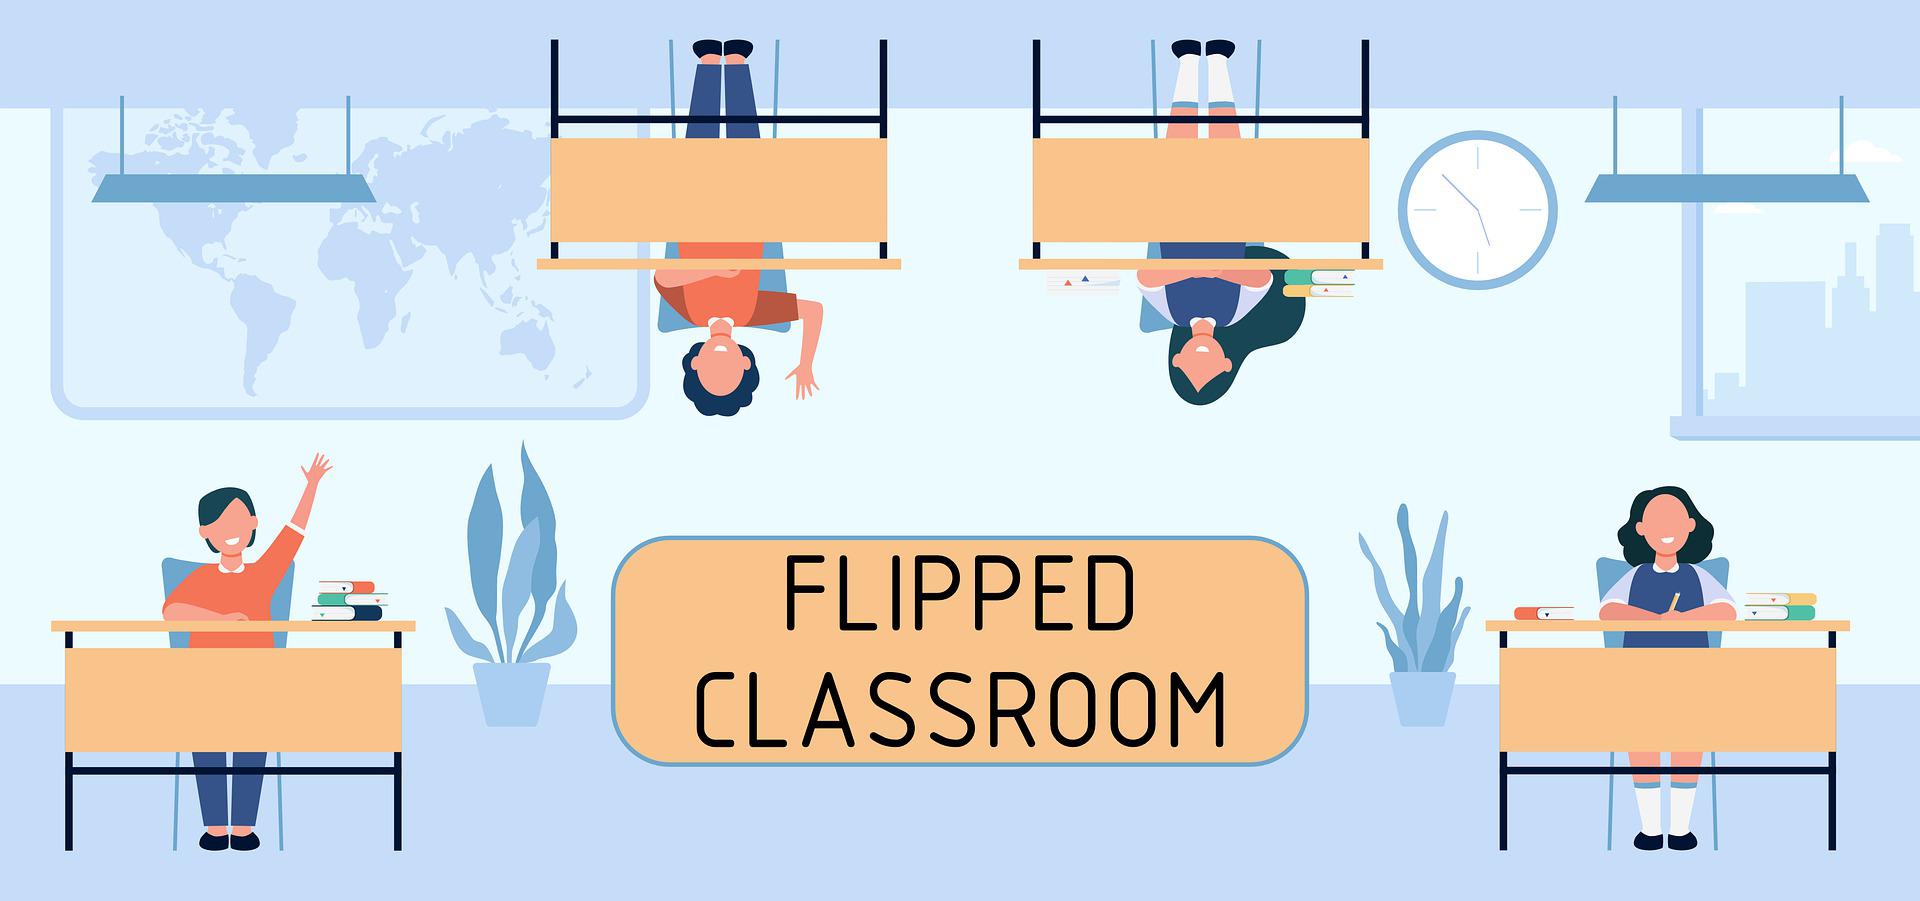 alt-flipped-classroom-cooperative-learning